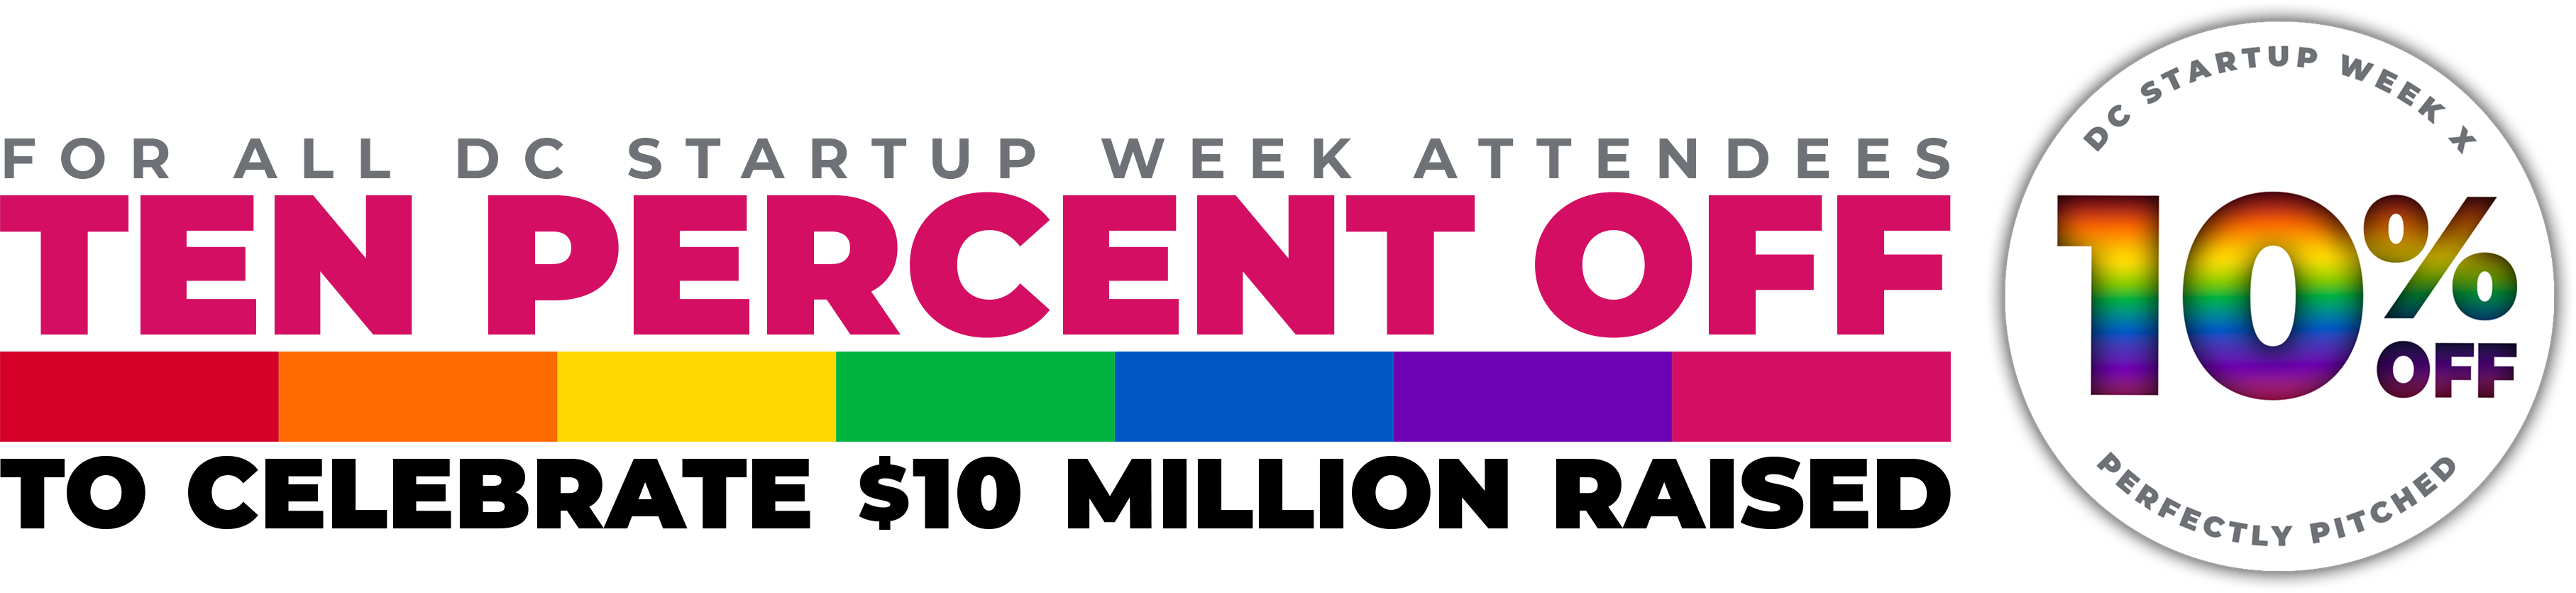 For all DC Startup Week attendees, 10 percent off to celebrate $10 million raised! Graphic includes the specially designed discount button, a rounded white graphic that says, "DC Startup Week x Perfectly Pitched, 10% off"